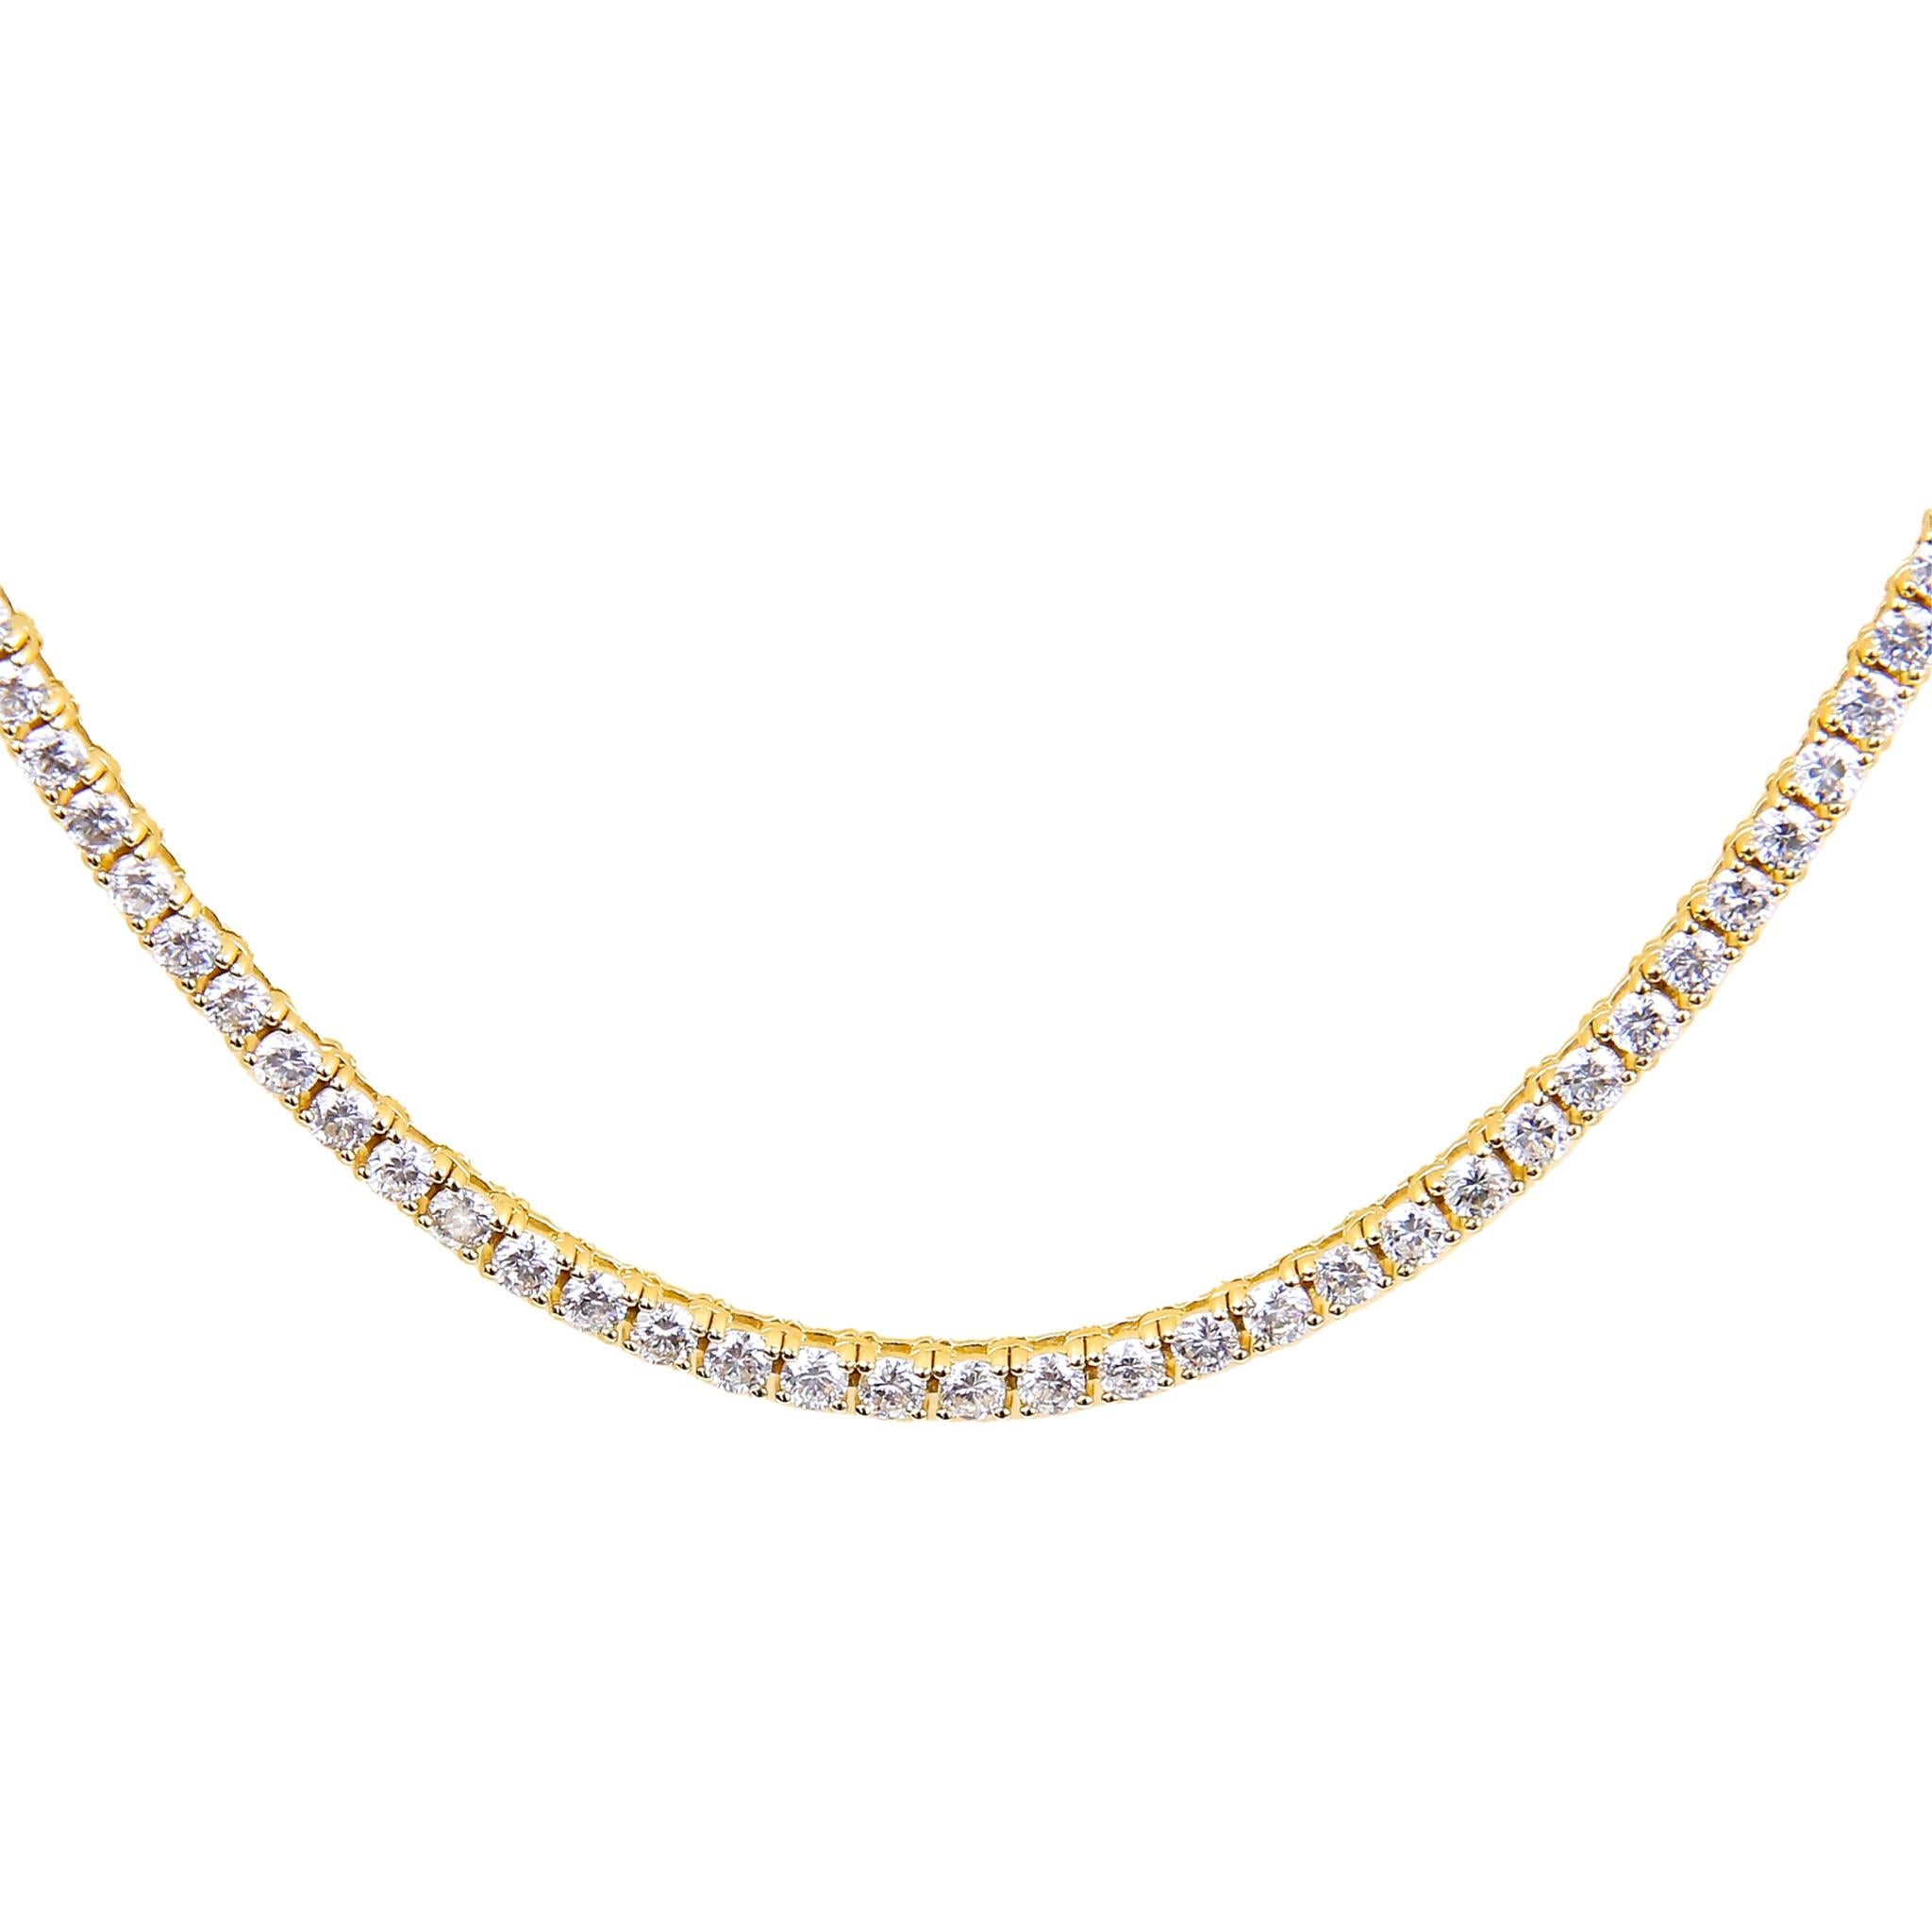 ECJ Collection Diamond Tennis Necklace
18k Yellow Gold 
Diamonds: 7.08ctw
Reference number: YFJ01038